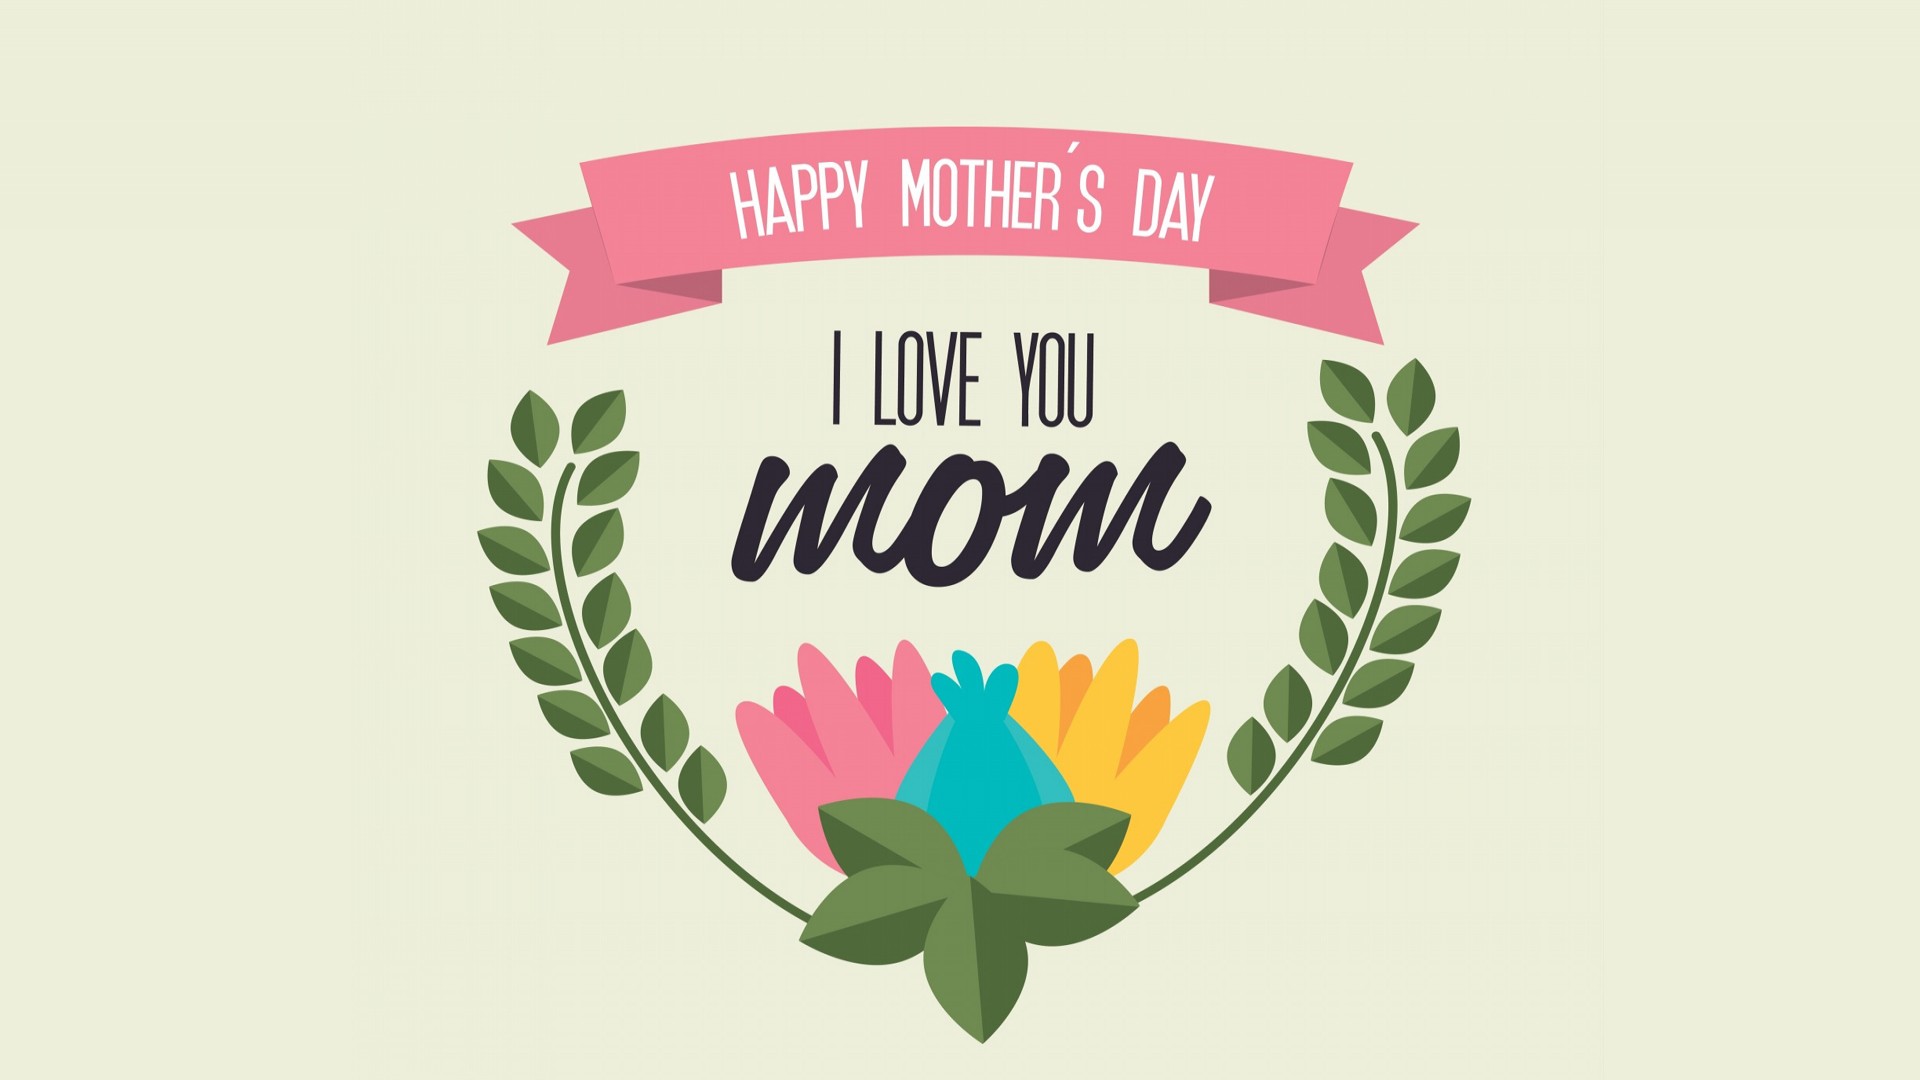 Mothers Day Image